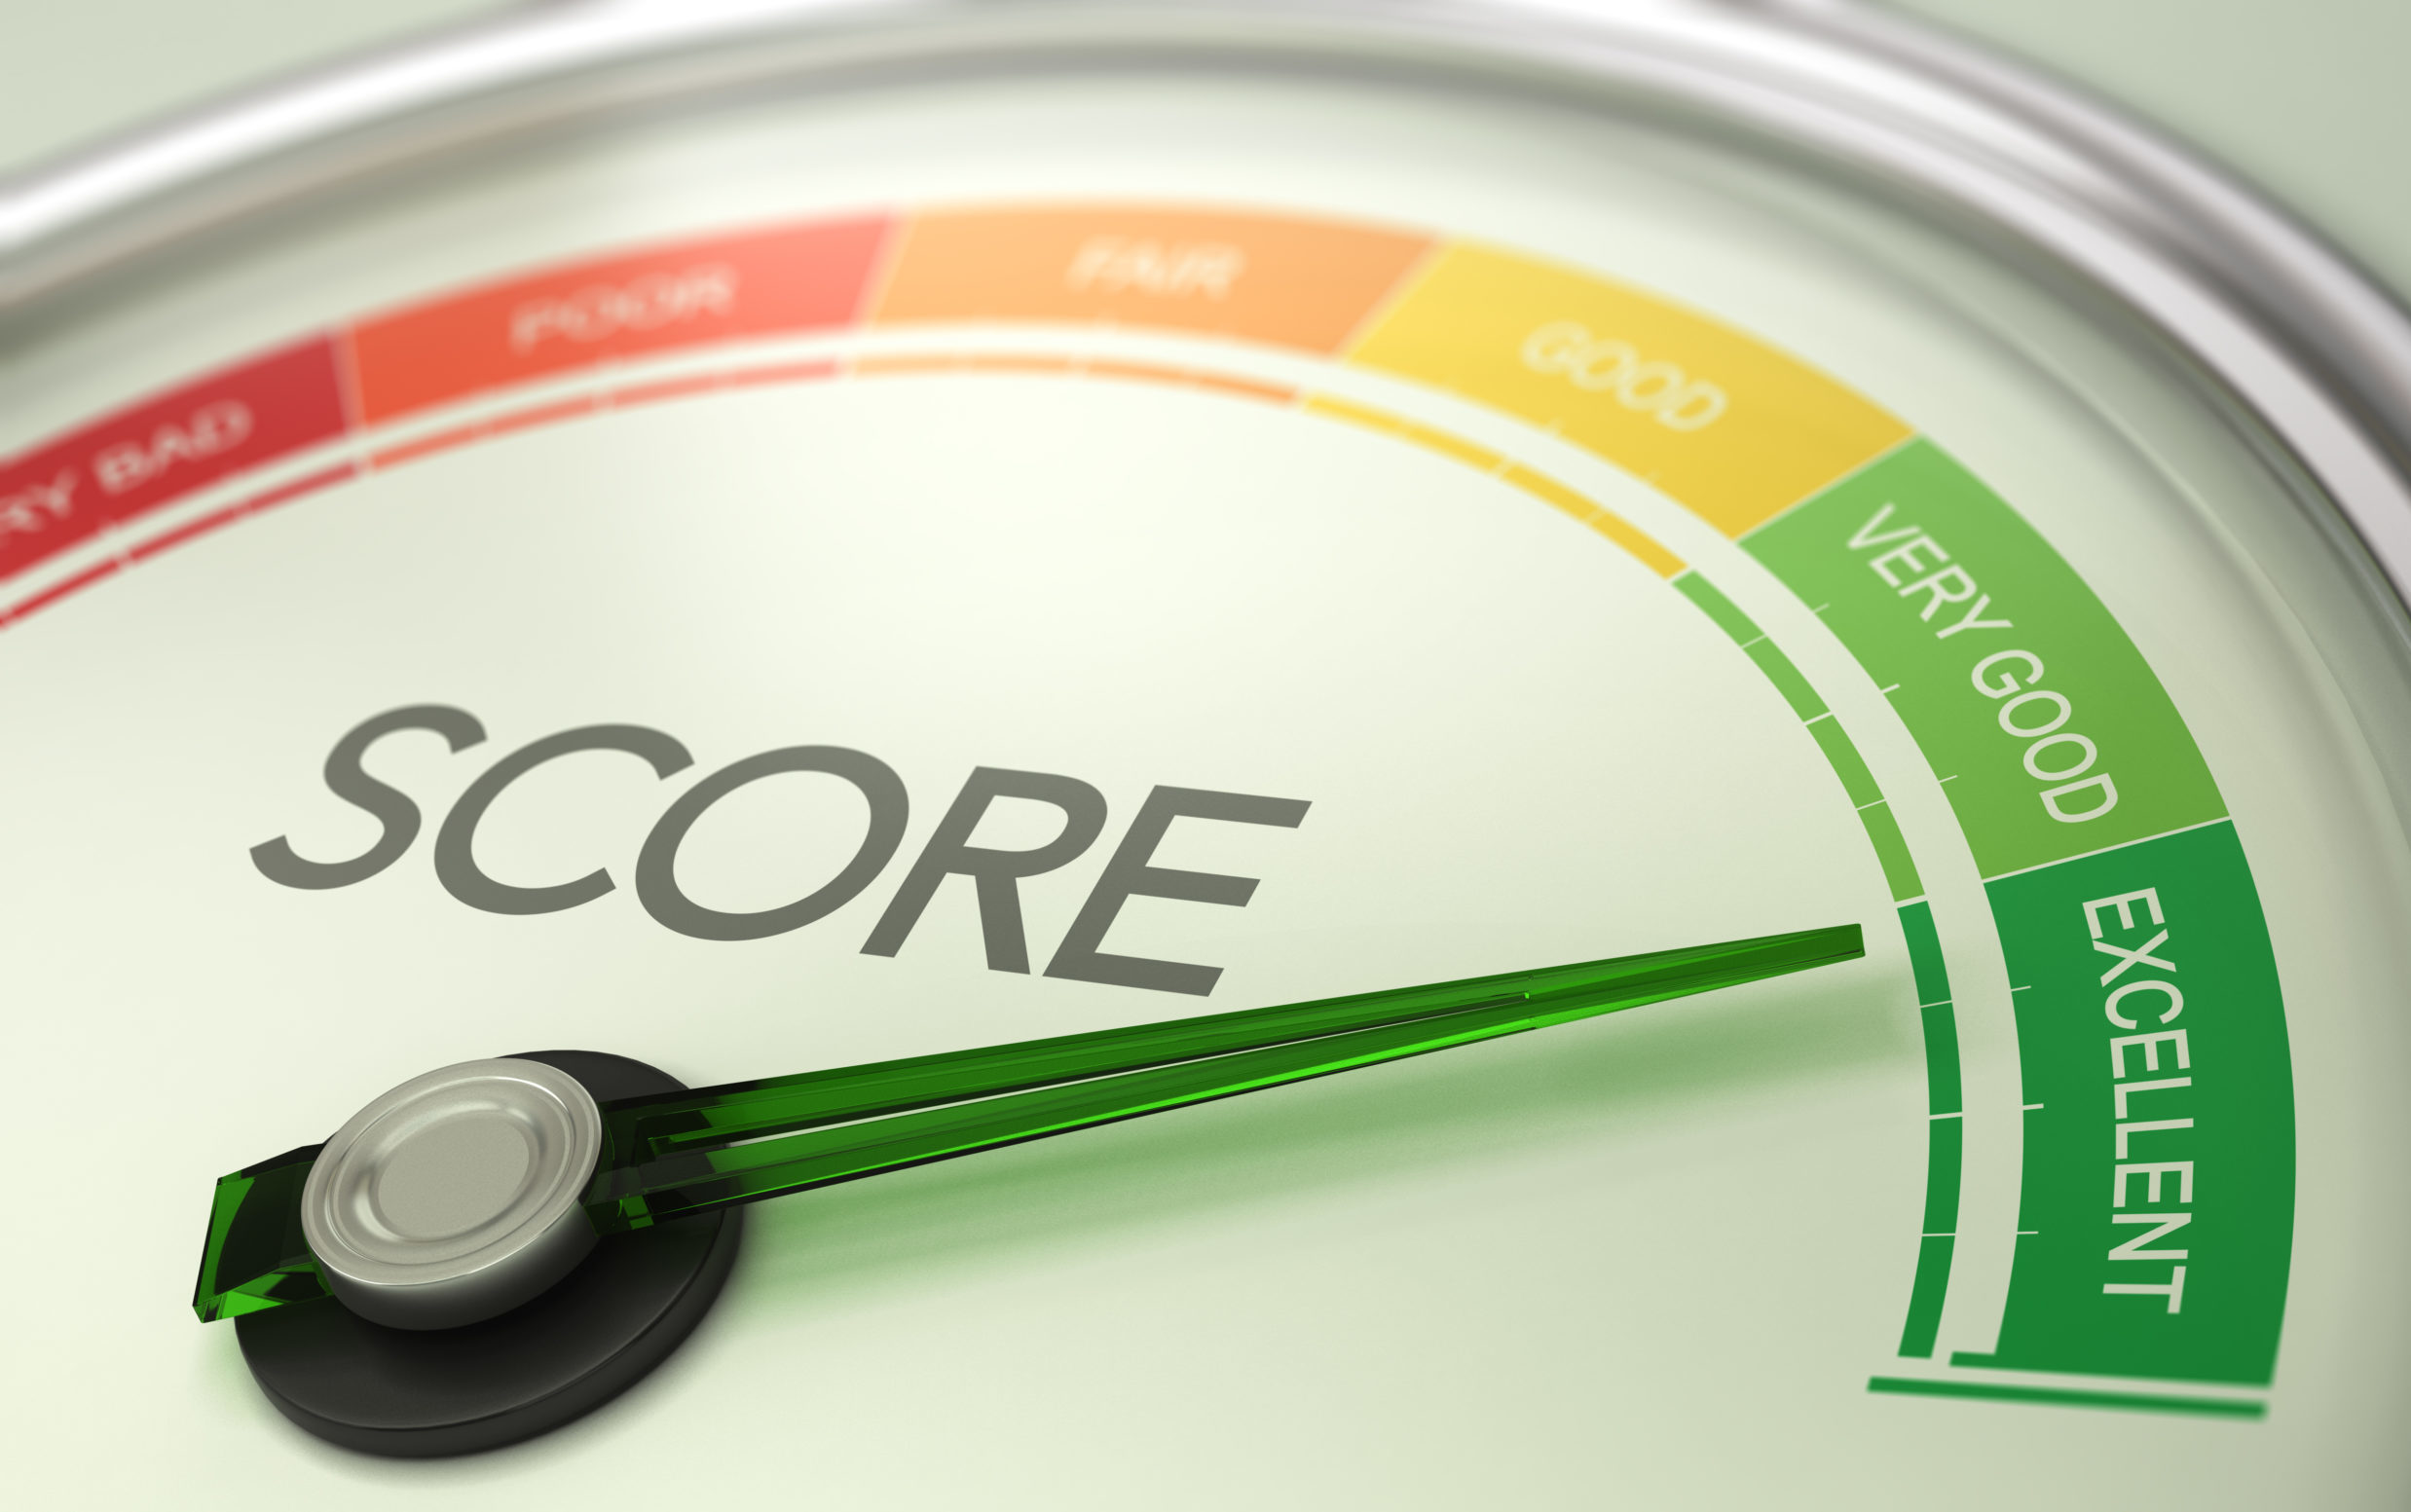 how to maintain a good credit score